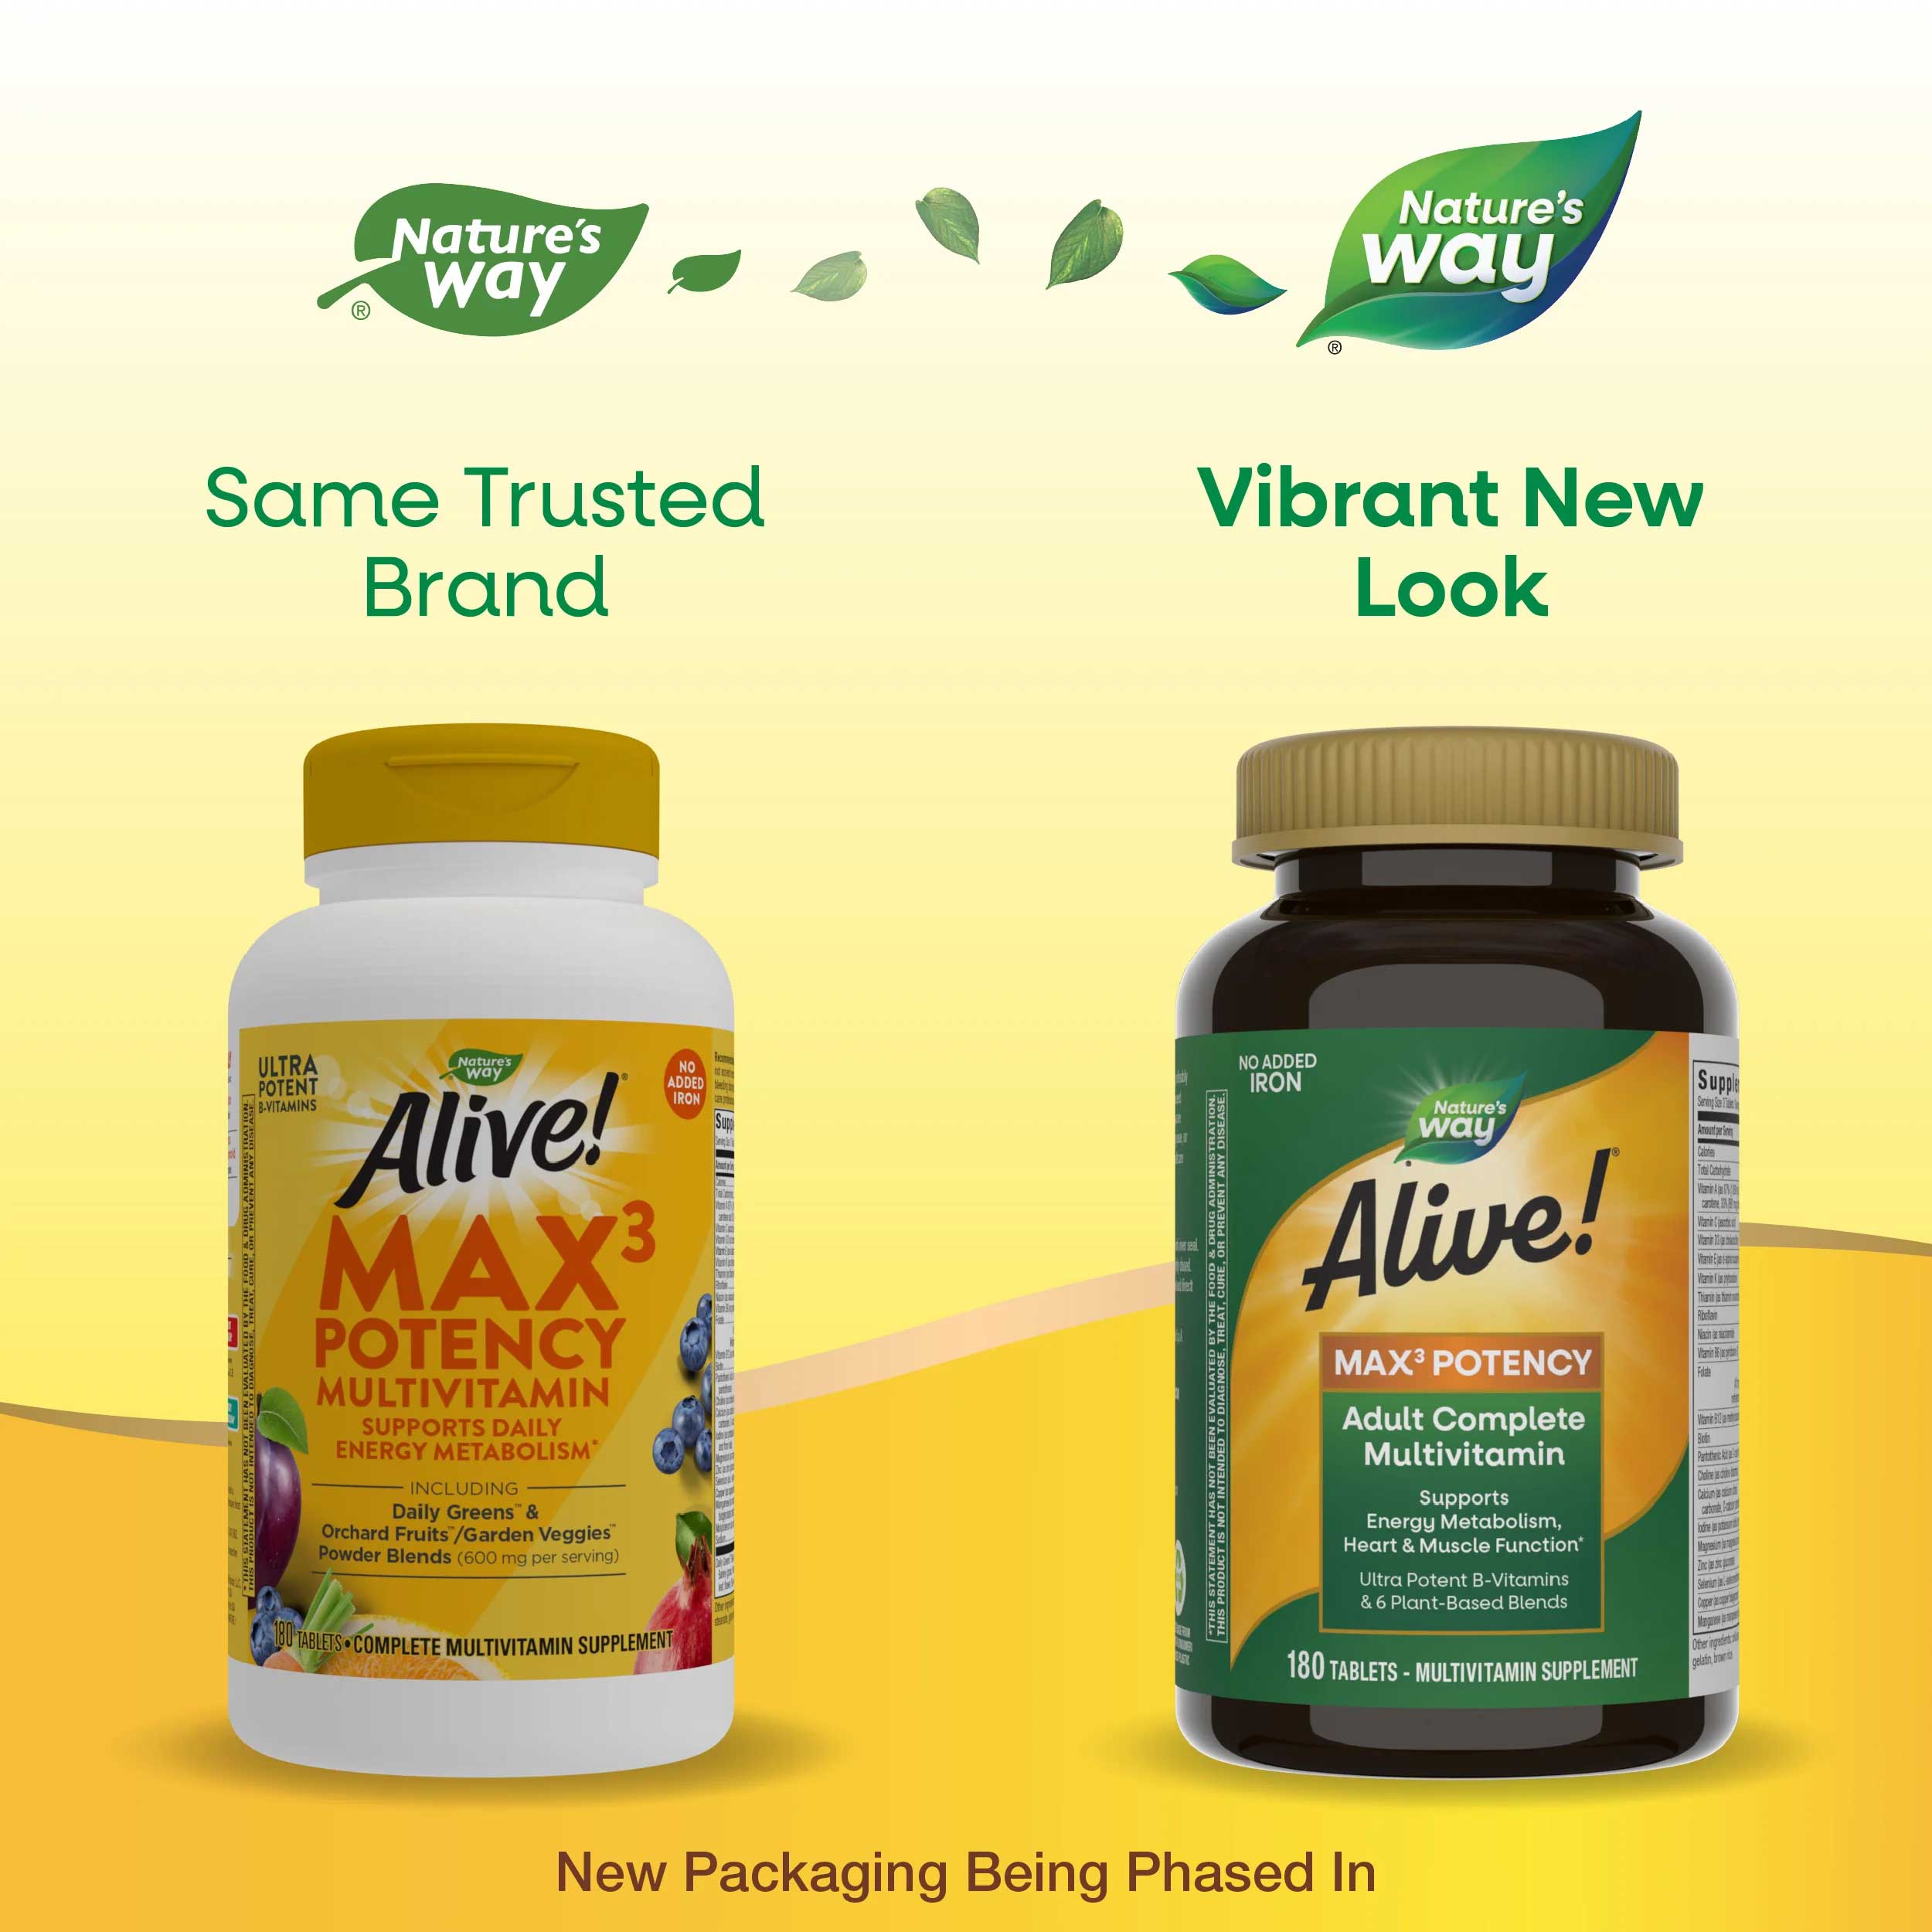 Nature's Way Alive! Max3 Daily Multi-Vitamin (No Added Iron) New Look